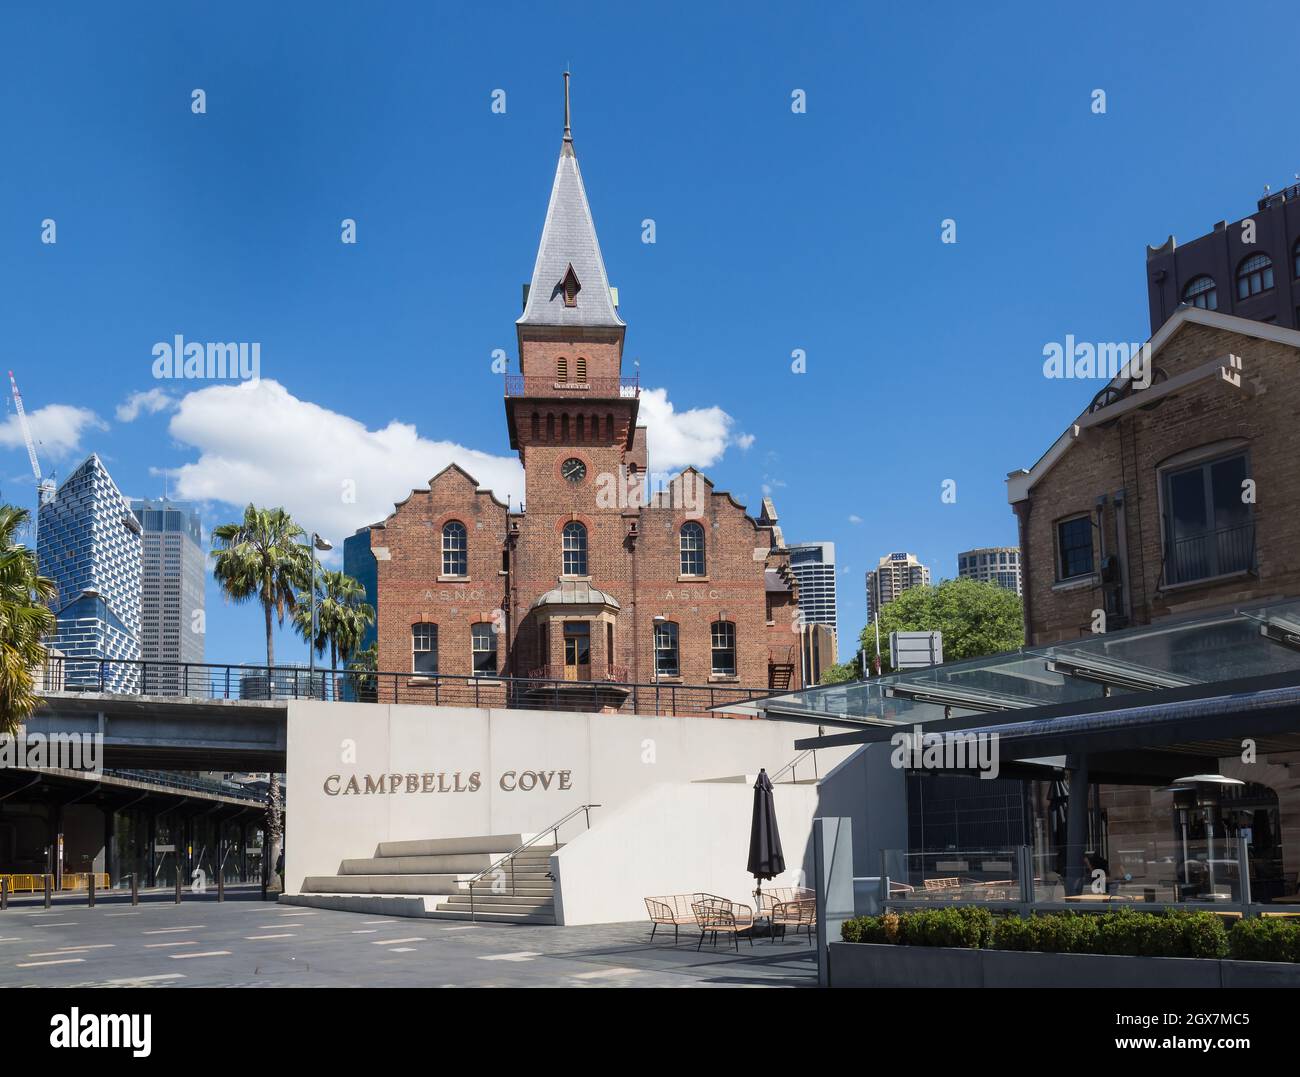 Sydney, Australia. Monday, 4th October, 2021. The Sydney central business district still very quiet as Sydney prepares to reopen once 70% full vaccination target reached by Monday 11th October. General views of Campbells Cove, The Rocks. Credit: Paul Lovelace/Alamy Live News Stock Photo